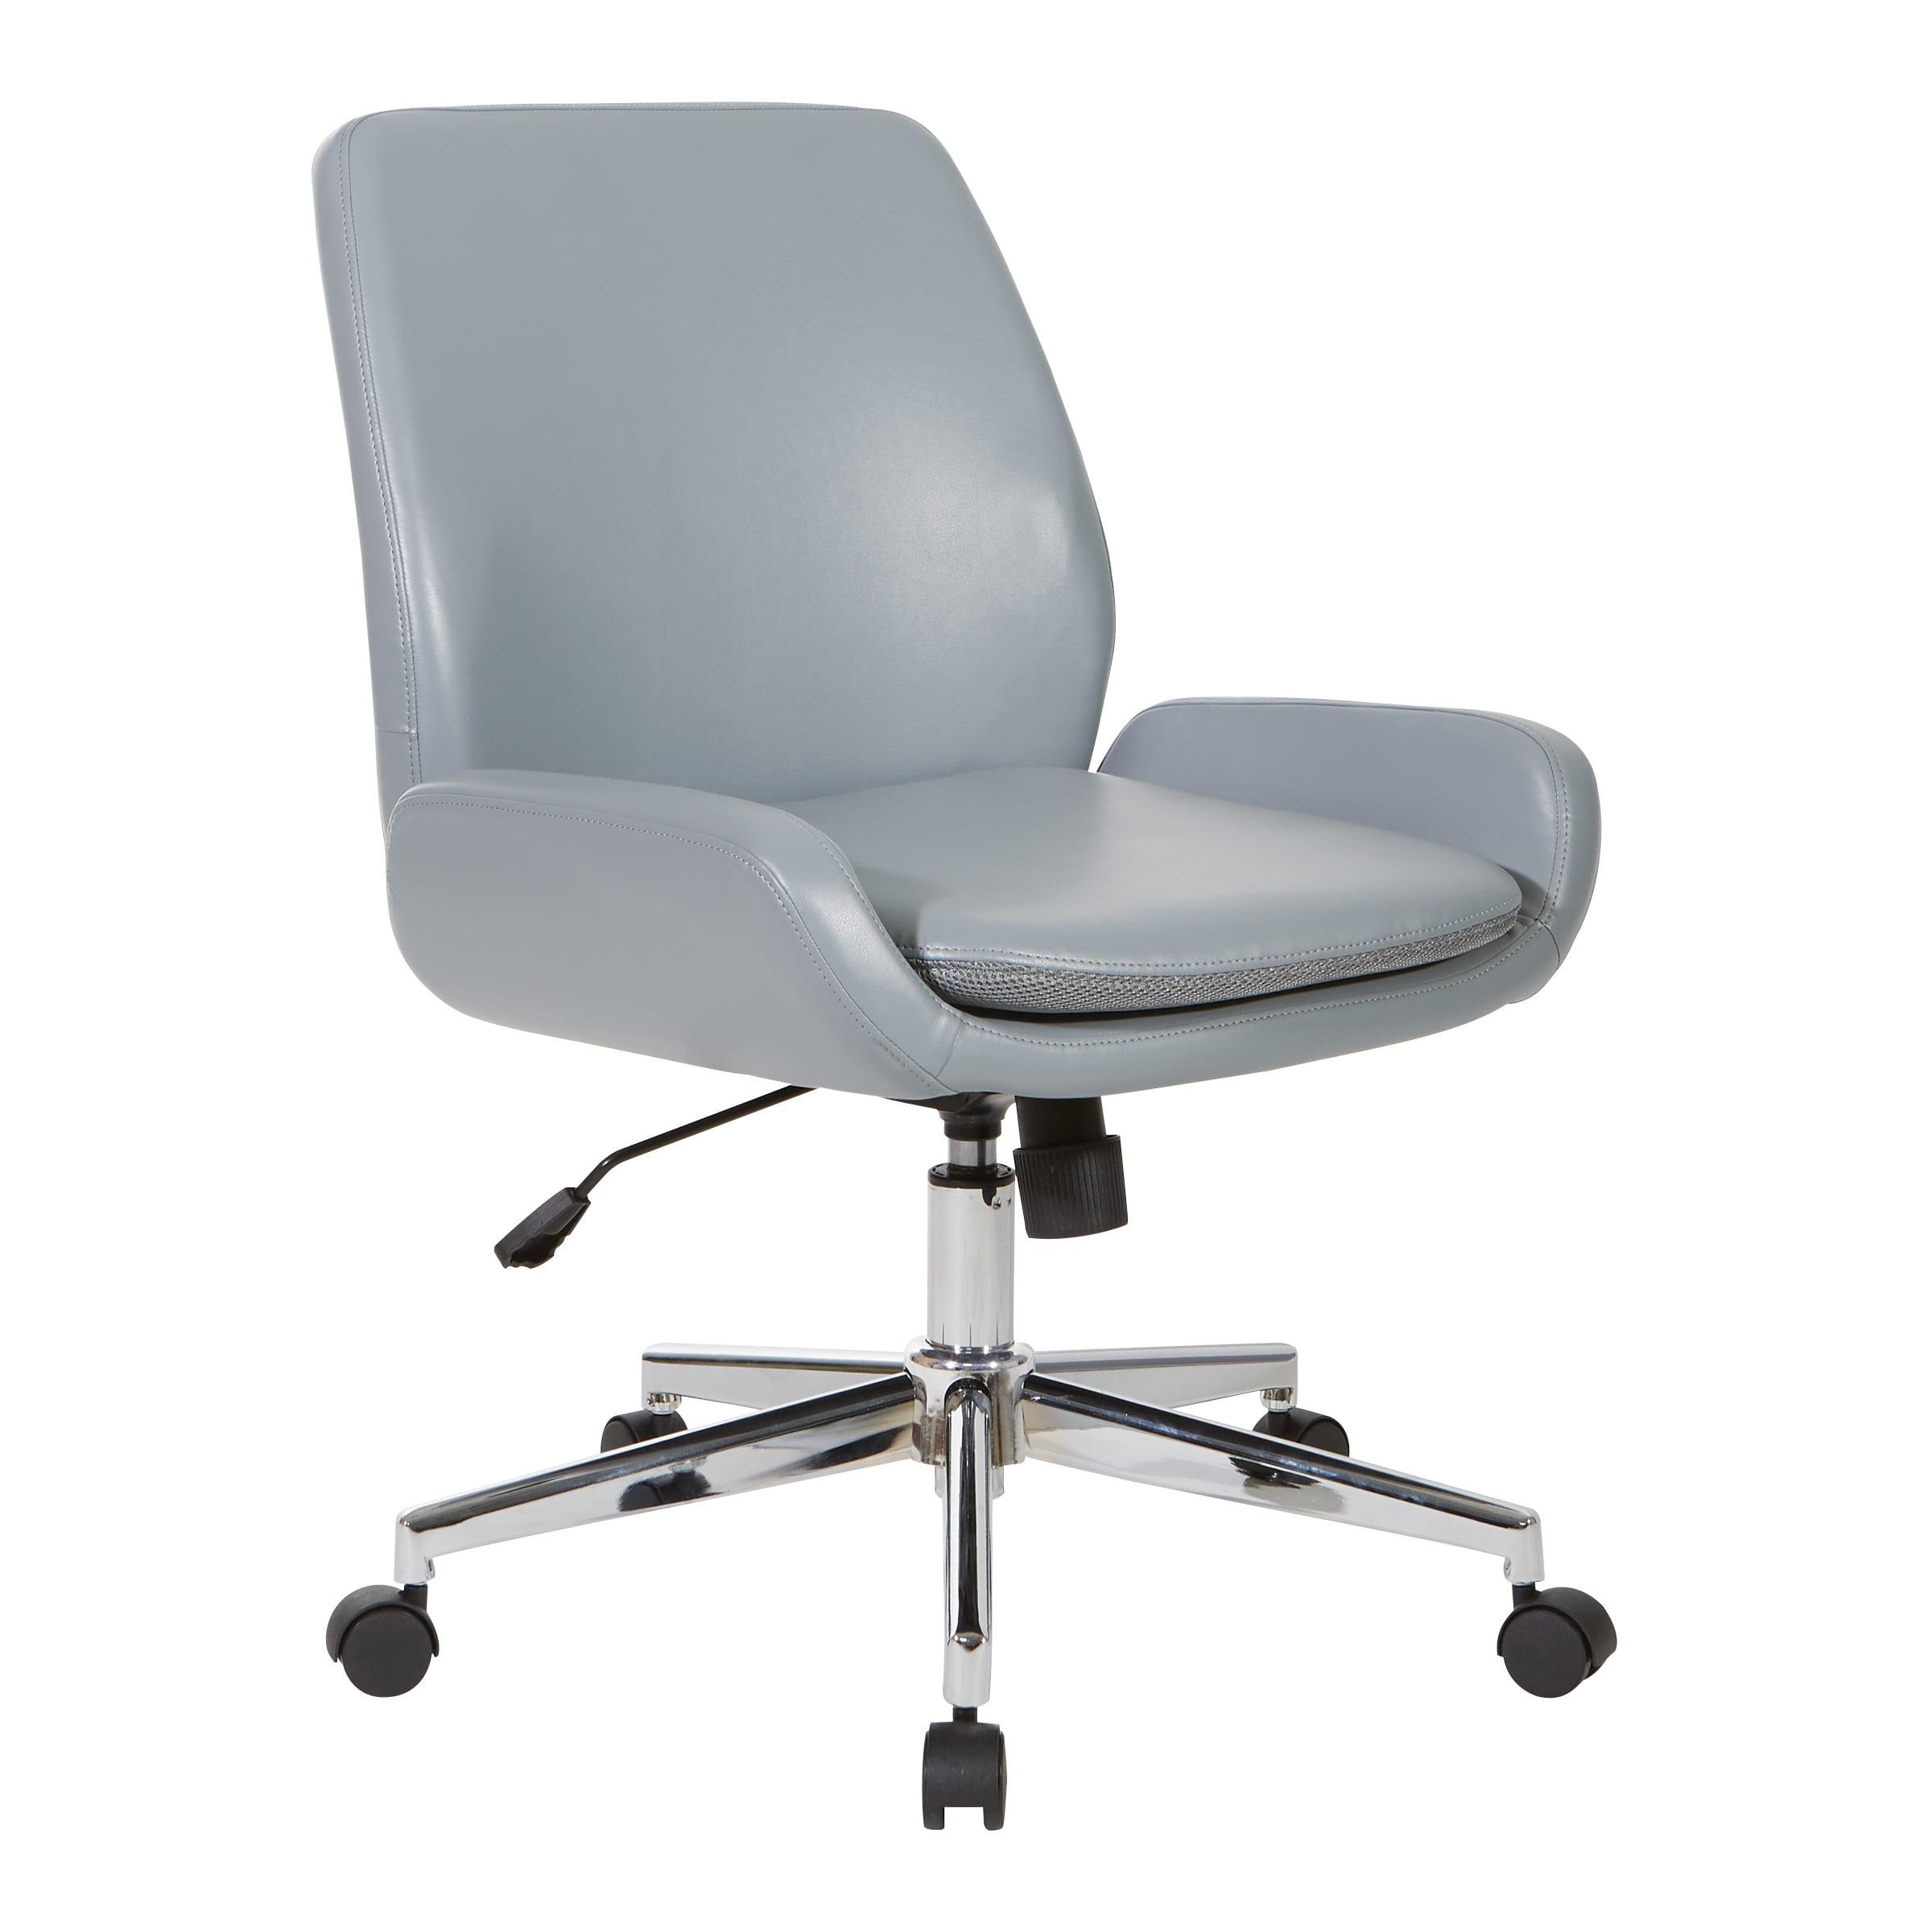 Charcoal Grey Faux Leather Swivel Executive Chair with Chrome Base